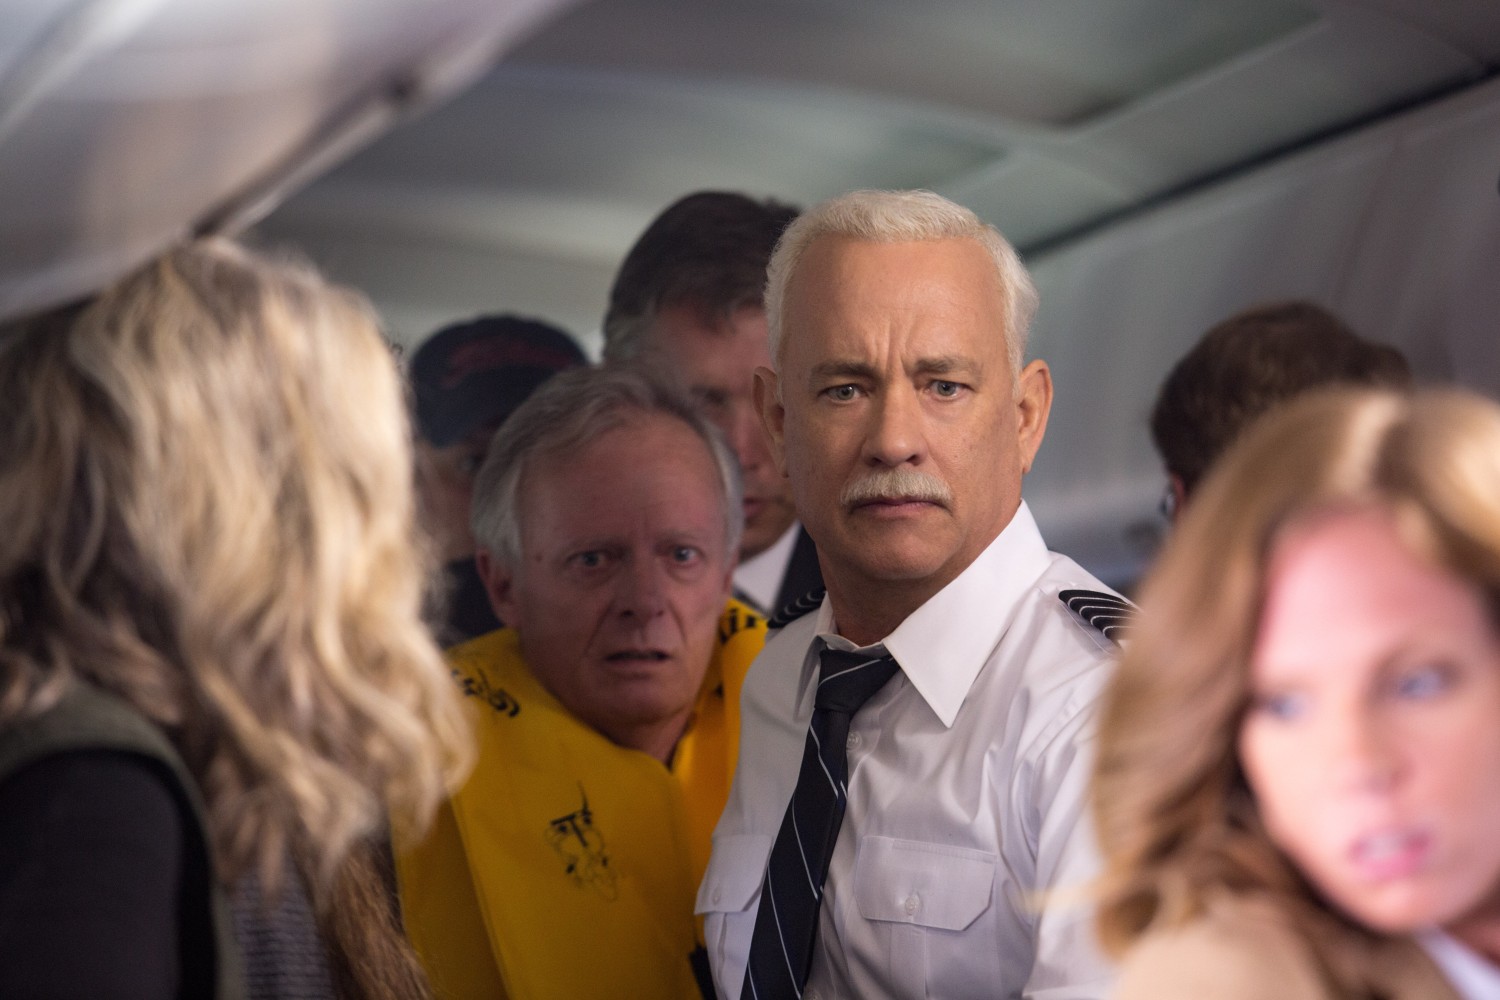 Sully Says: There Were a Lot of Good Things, But We've Got a Ways to Go